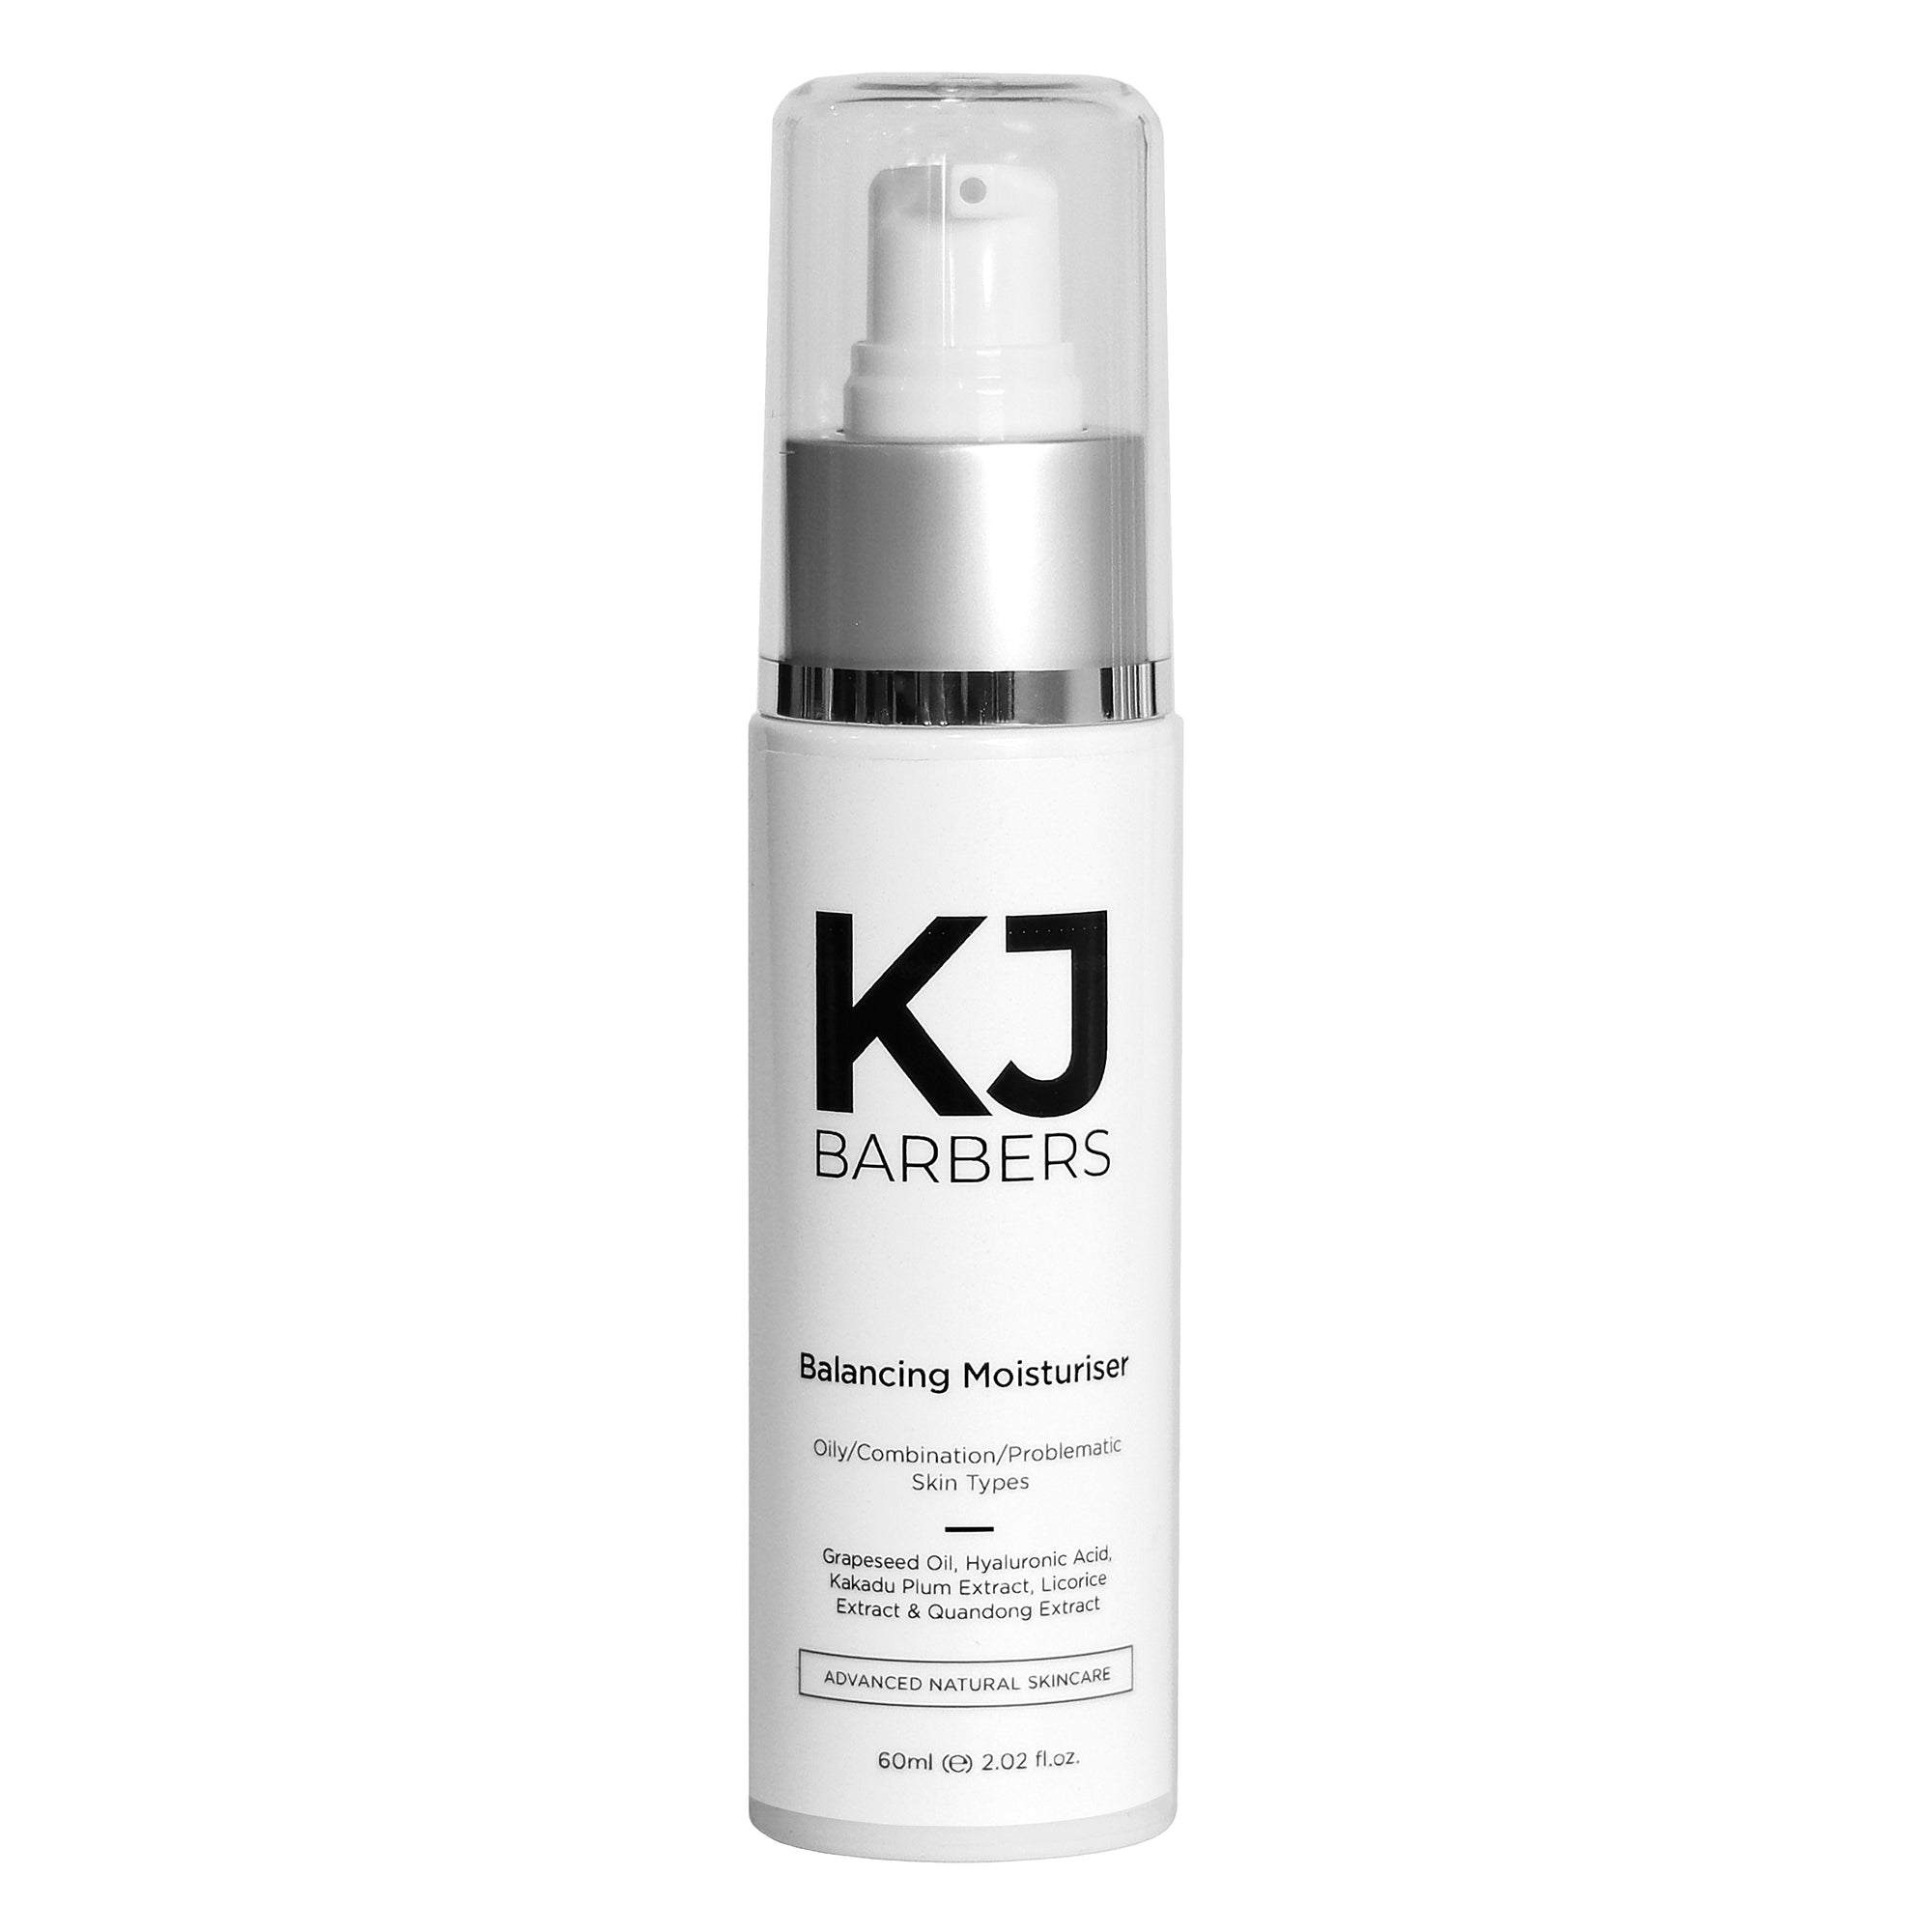 KJ Barbers enzymatic balancing moisturiser, used to treat problematic and acne prone skin.